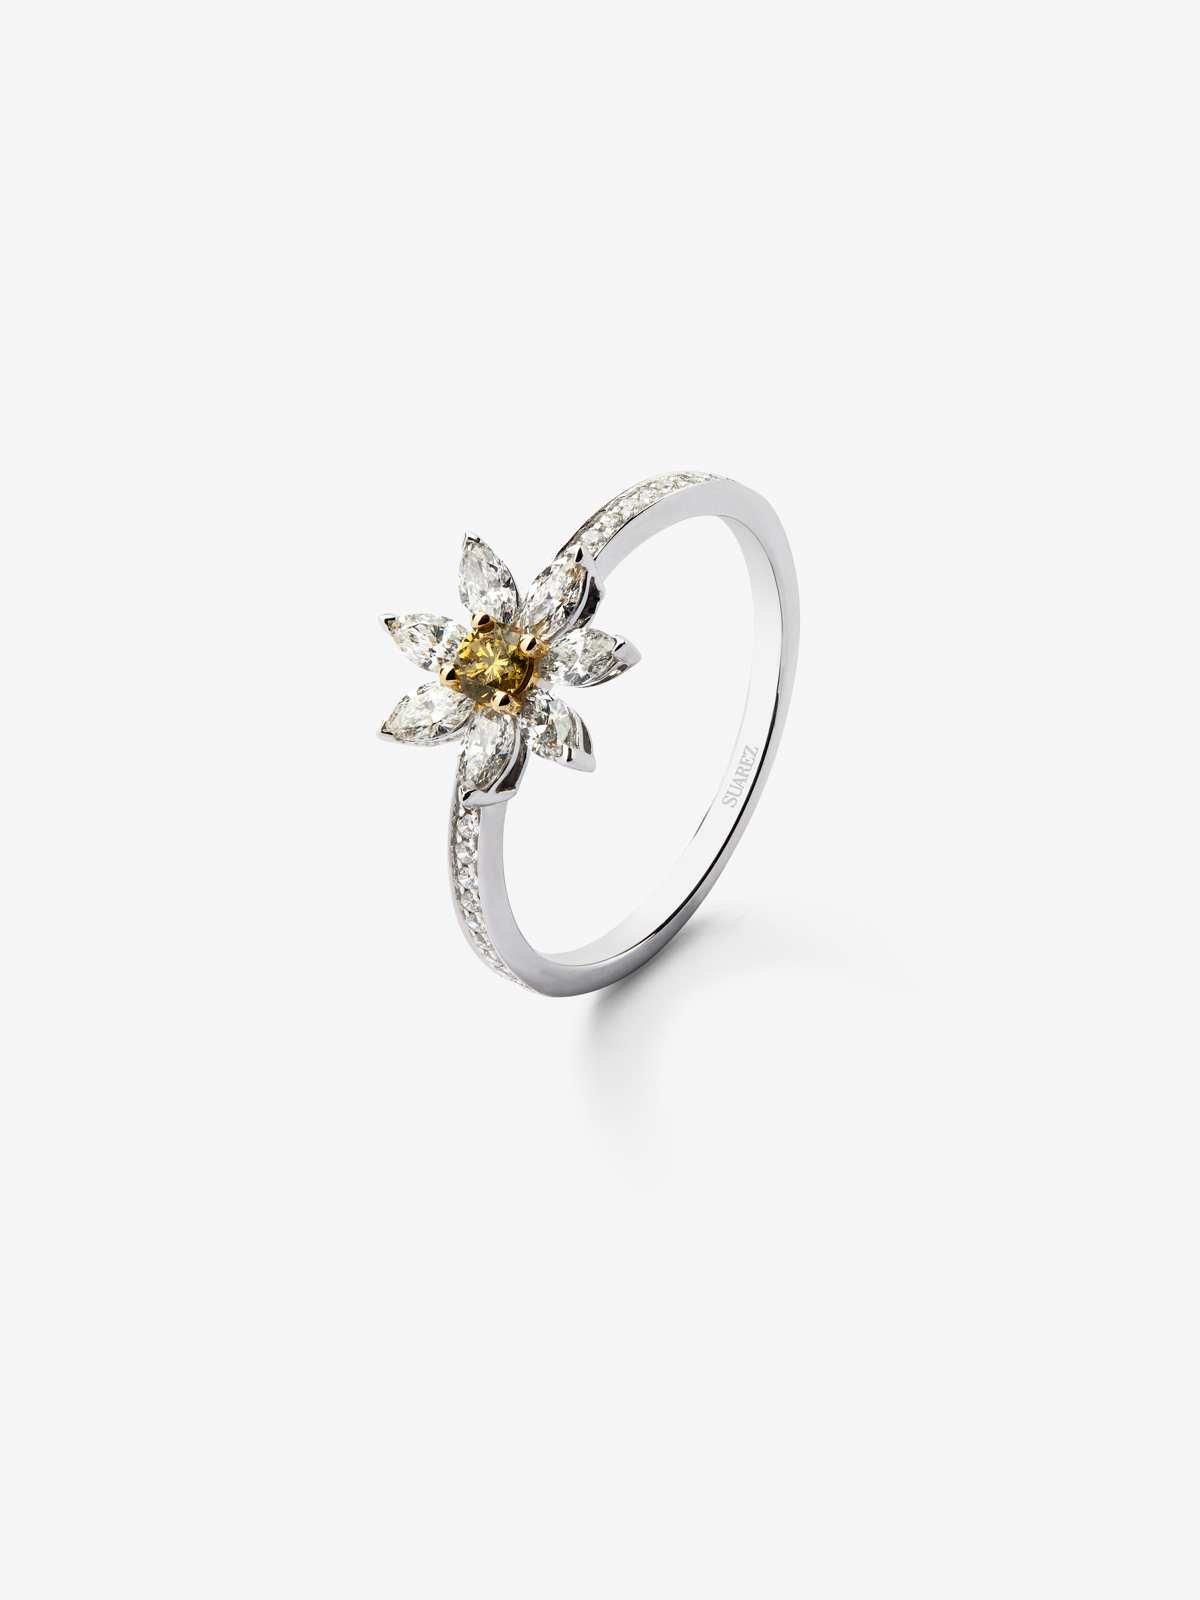 18k white gold flower ring with diamonds